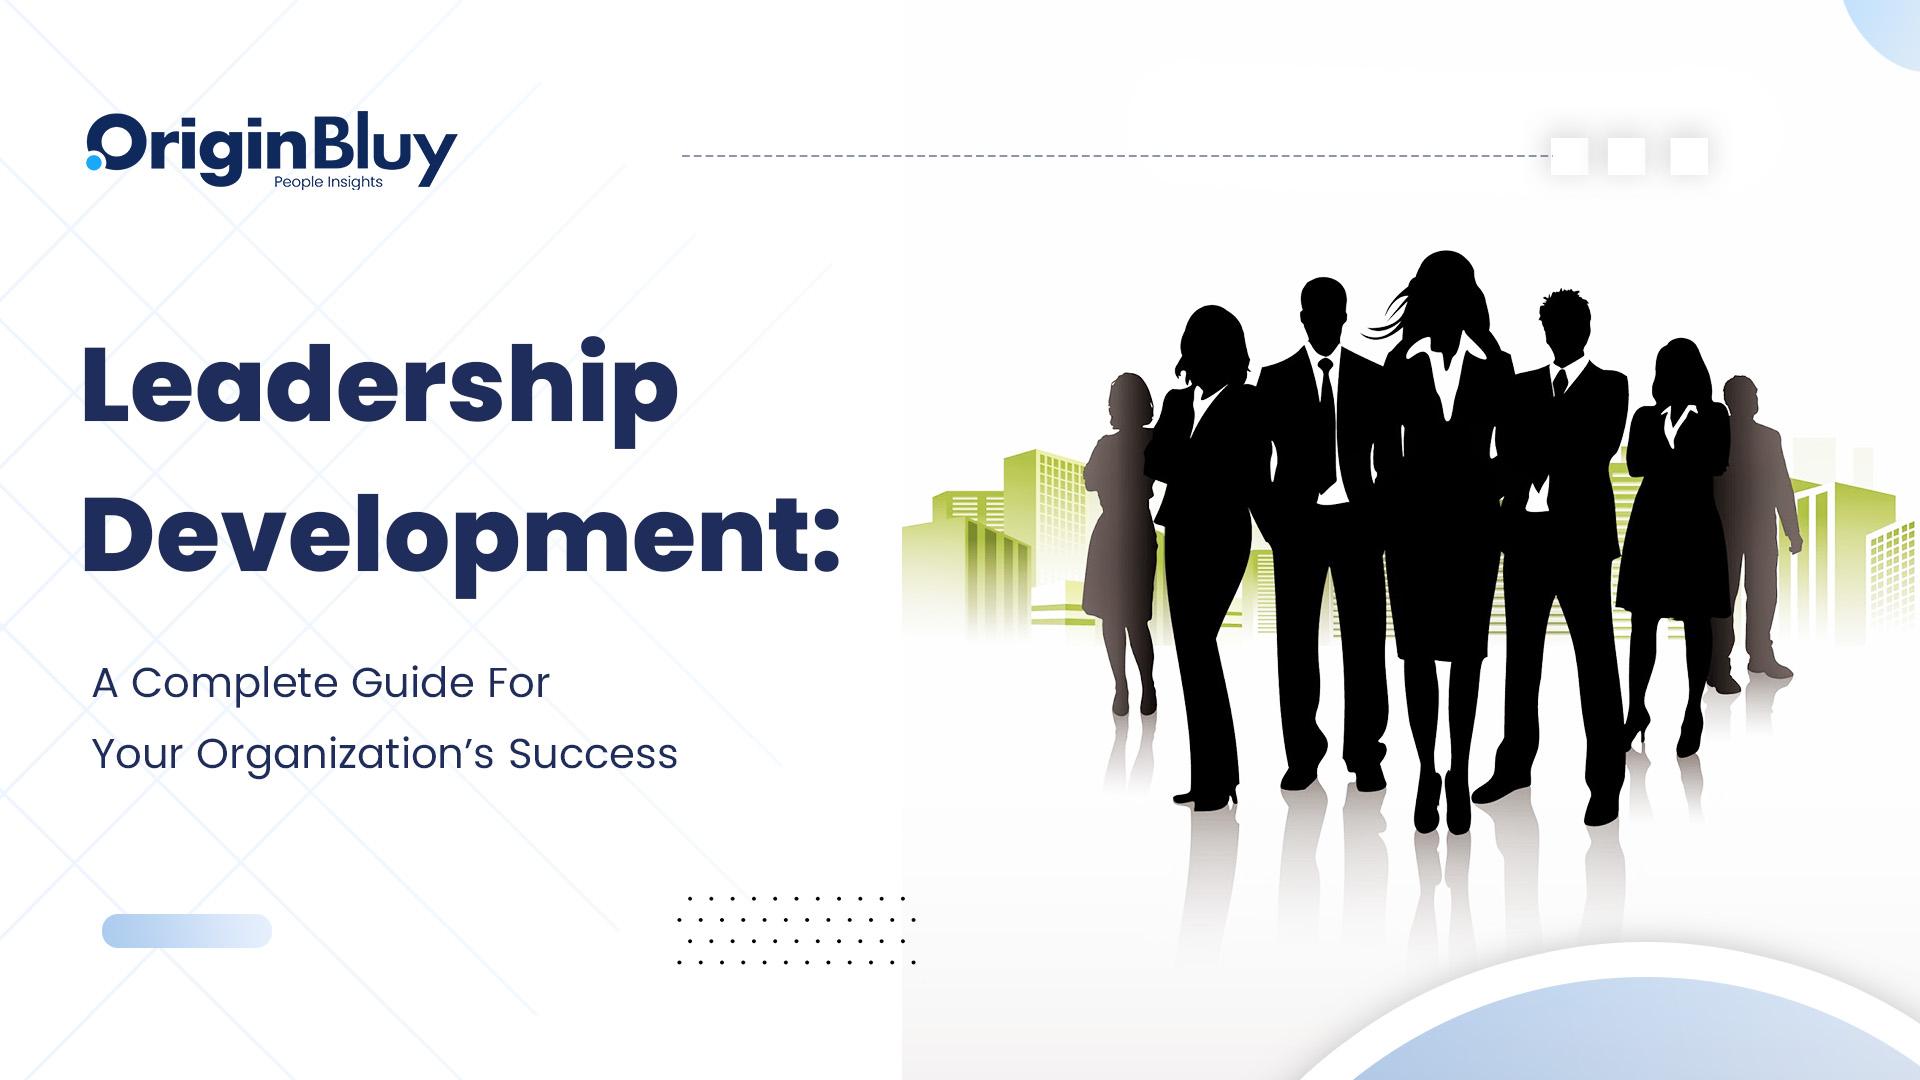 Leadership Development: A Complete Guide For Your Organization’s Success